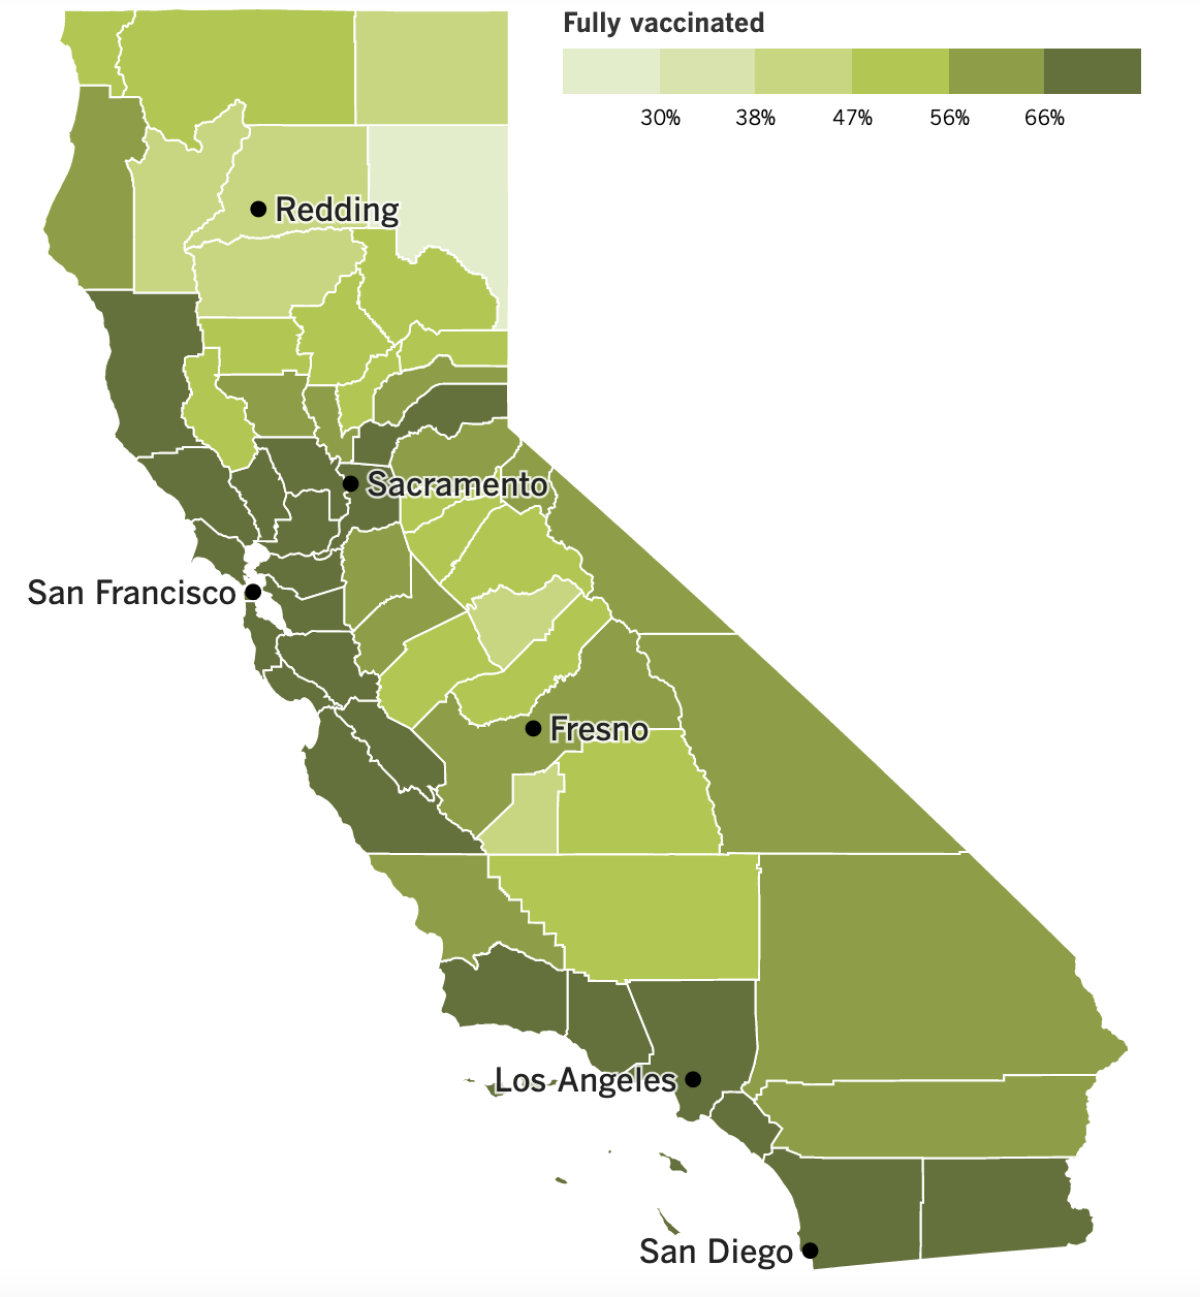 A map of California's COVID-19 vaccination progress by county.